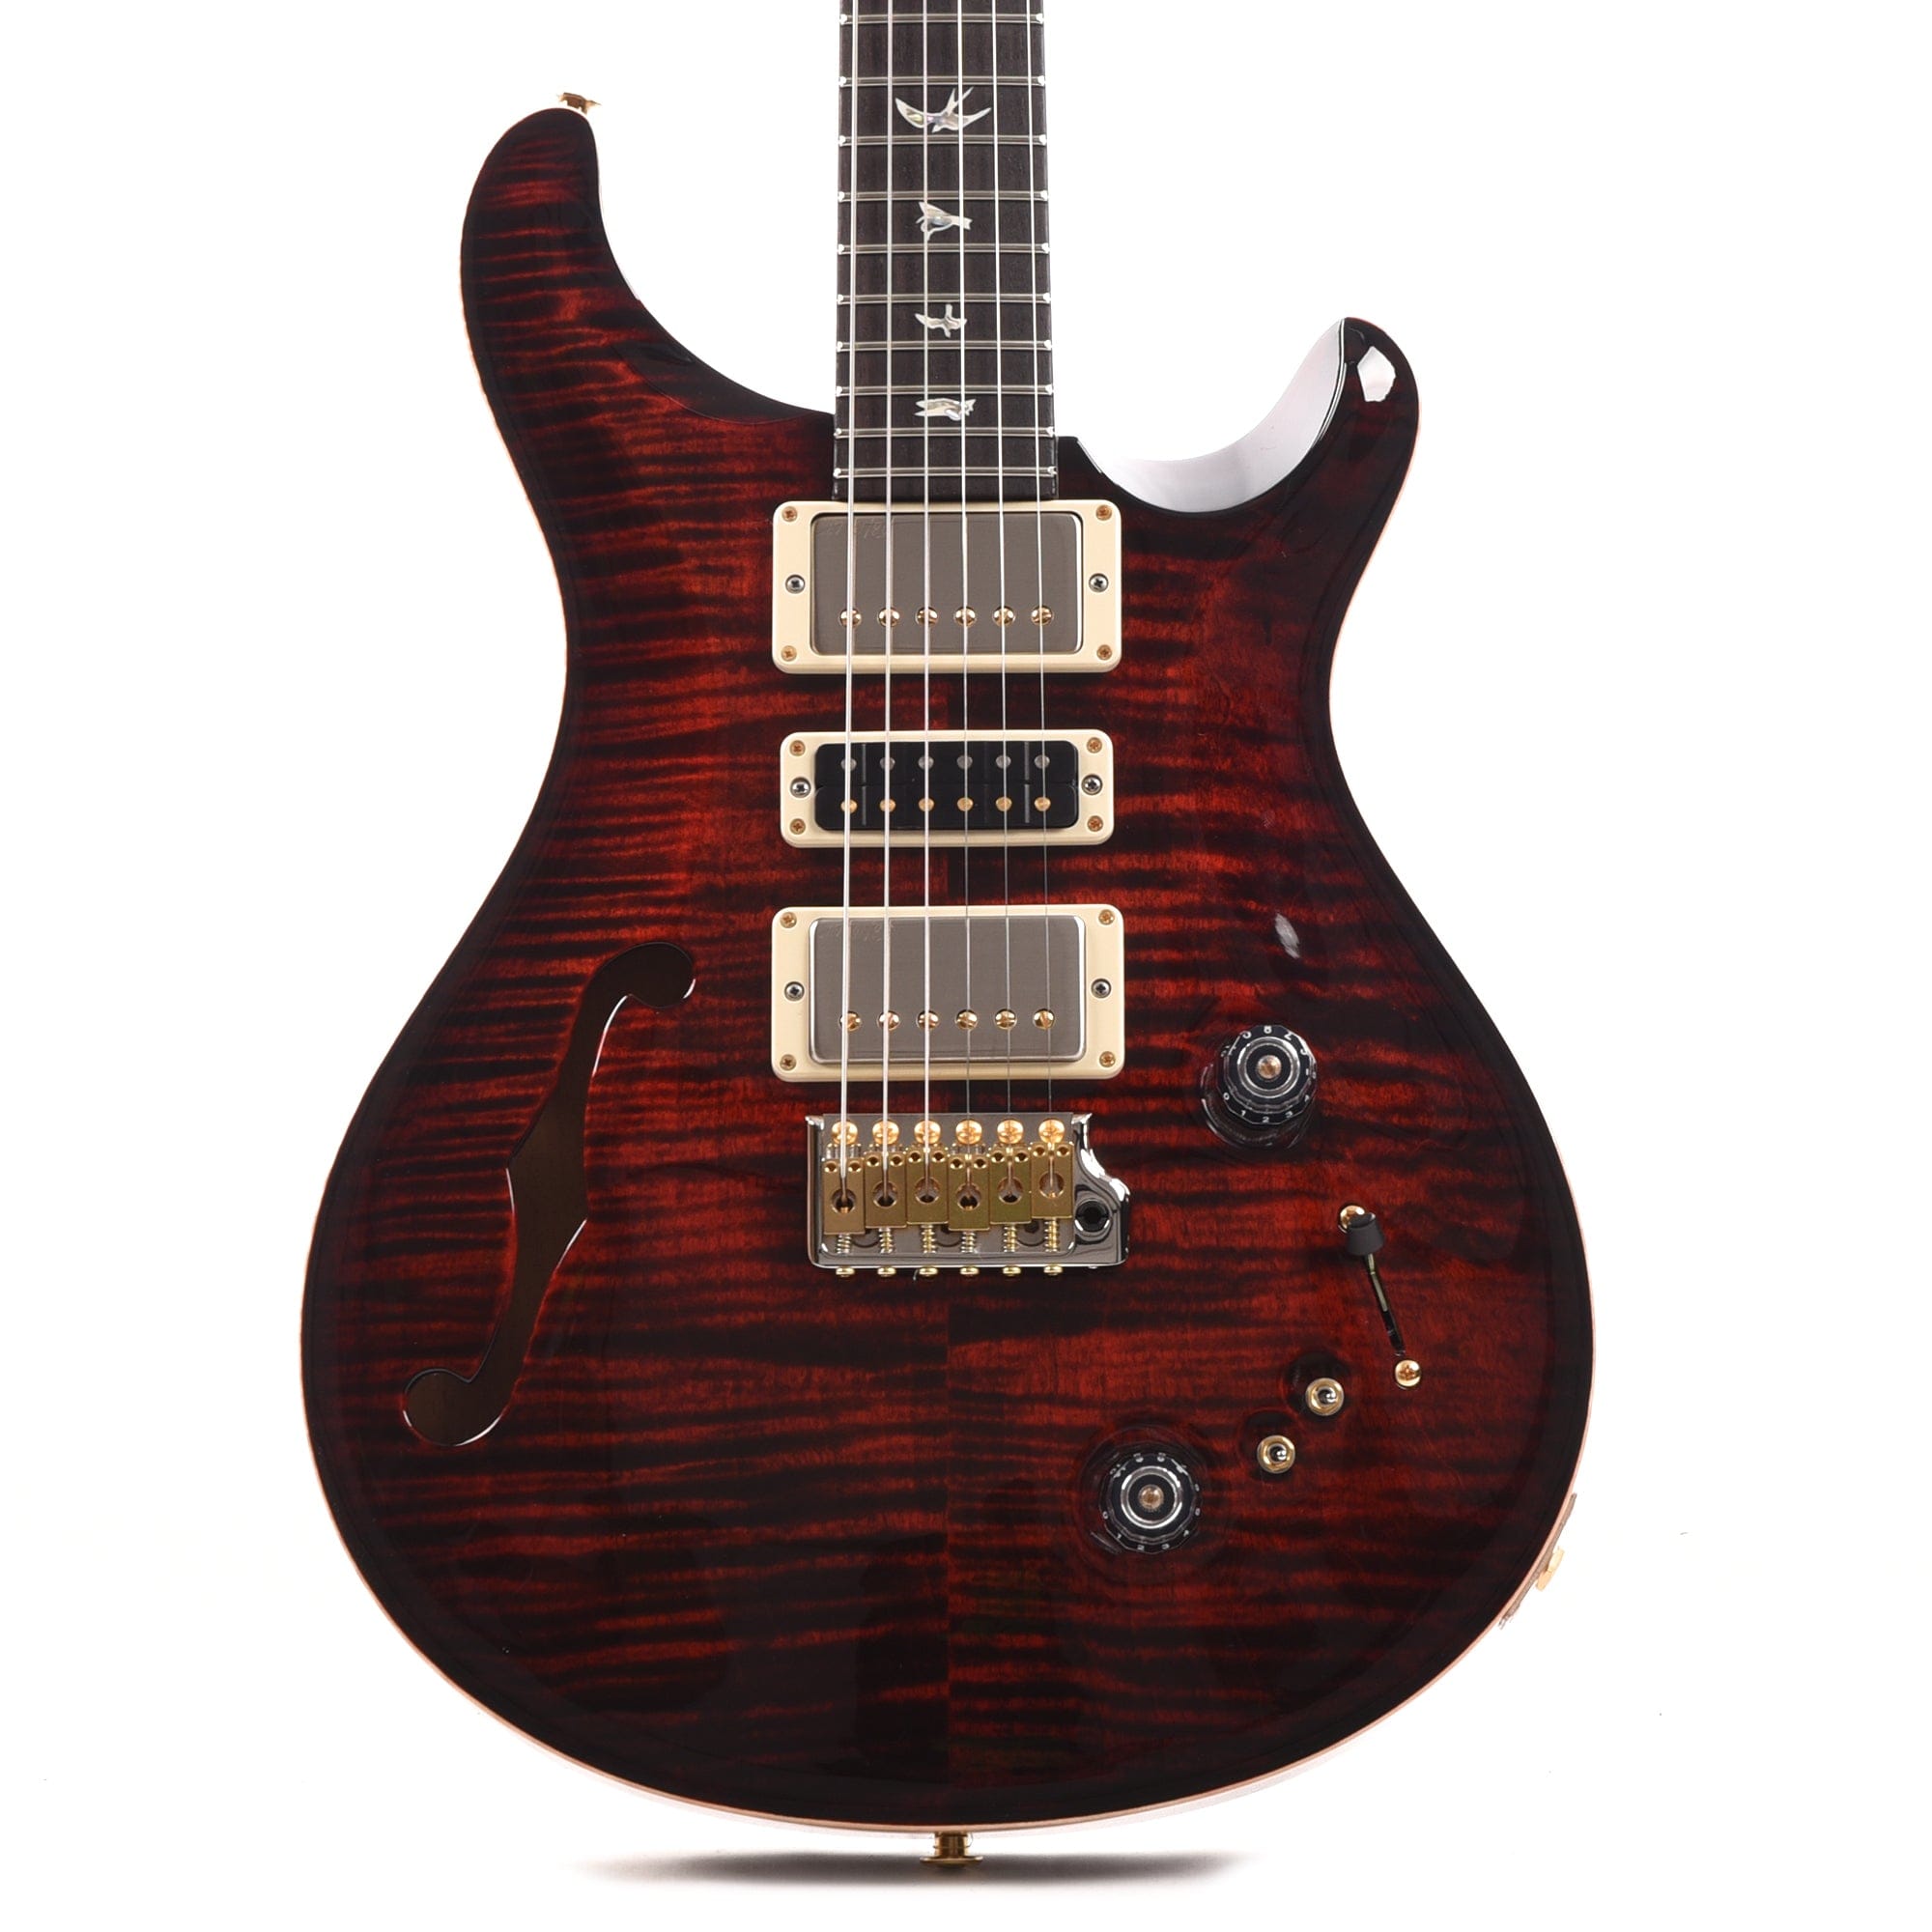 PRS Special Semi-Hollow 10 Top Fire Red Burst (Serial #0349670) Electric Guitars / Semi-Hollow